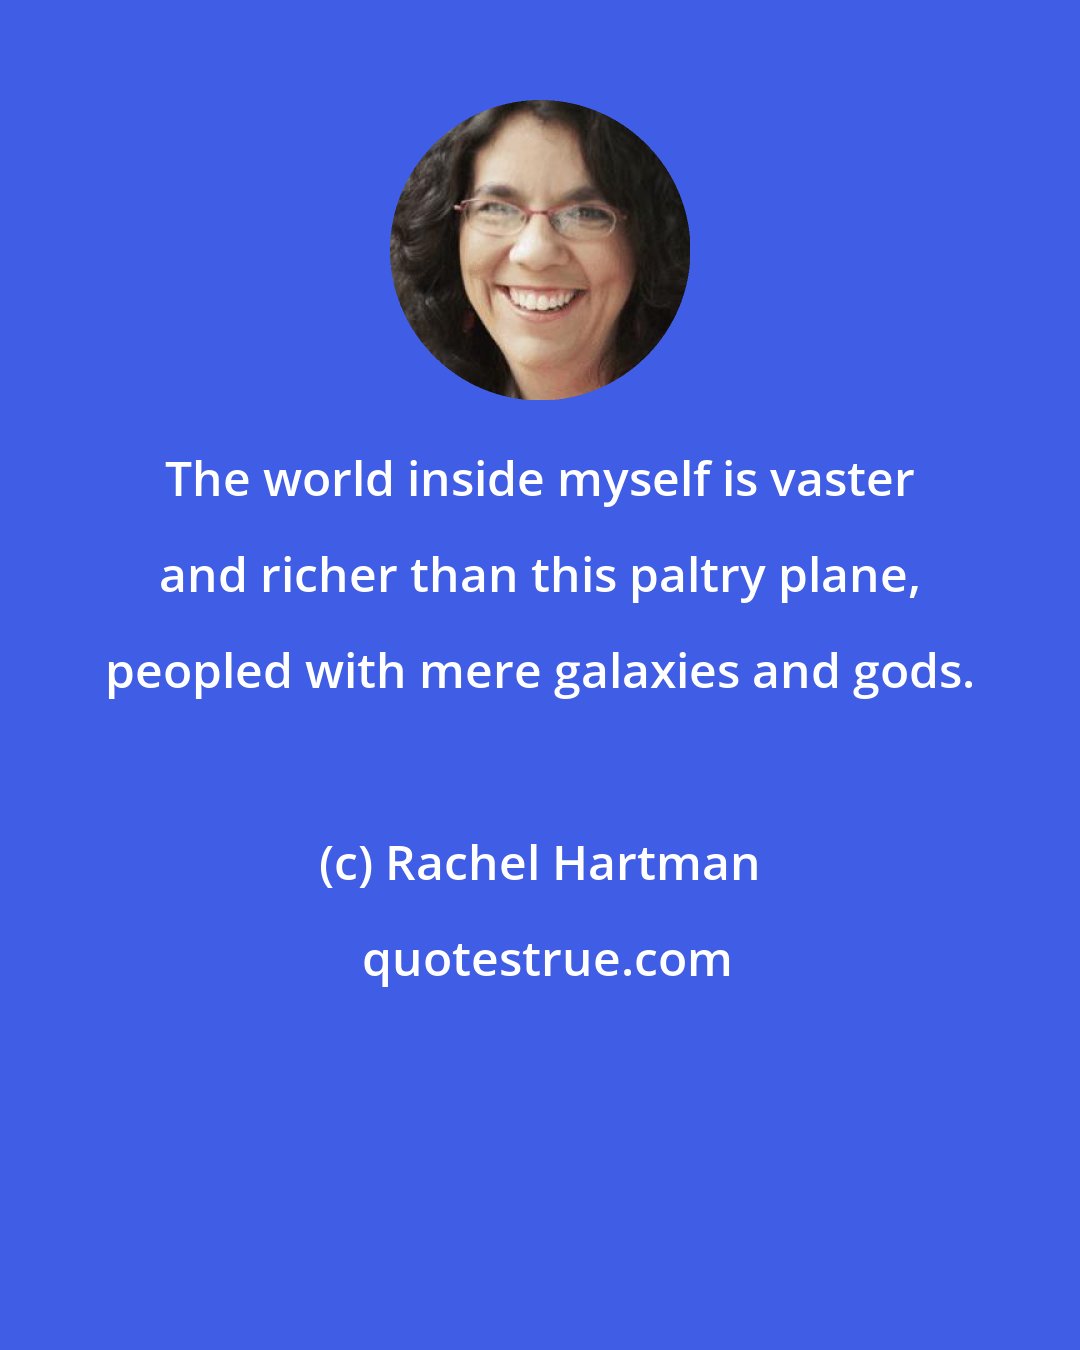 Rachel Hartman: The world inside myself is vaster and richer than this paltry plane, peopled with mere galaxies and gods.